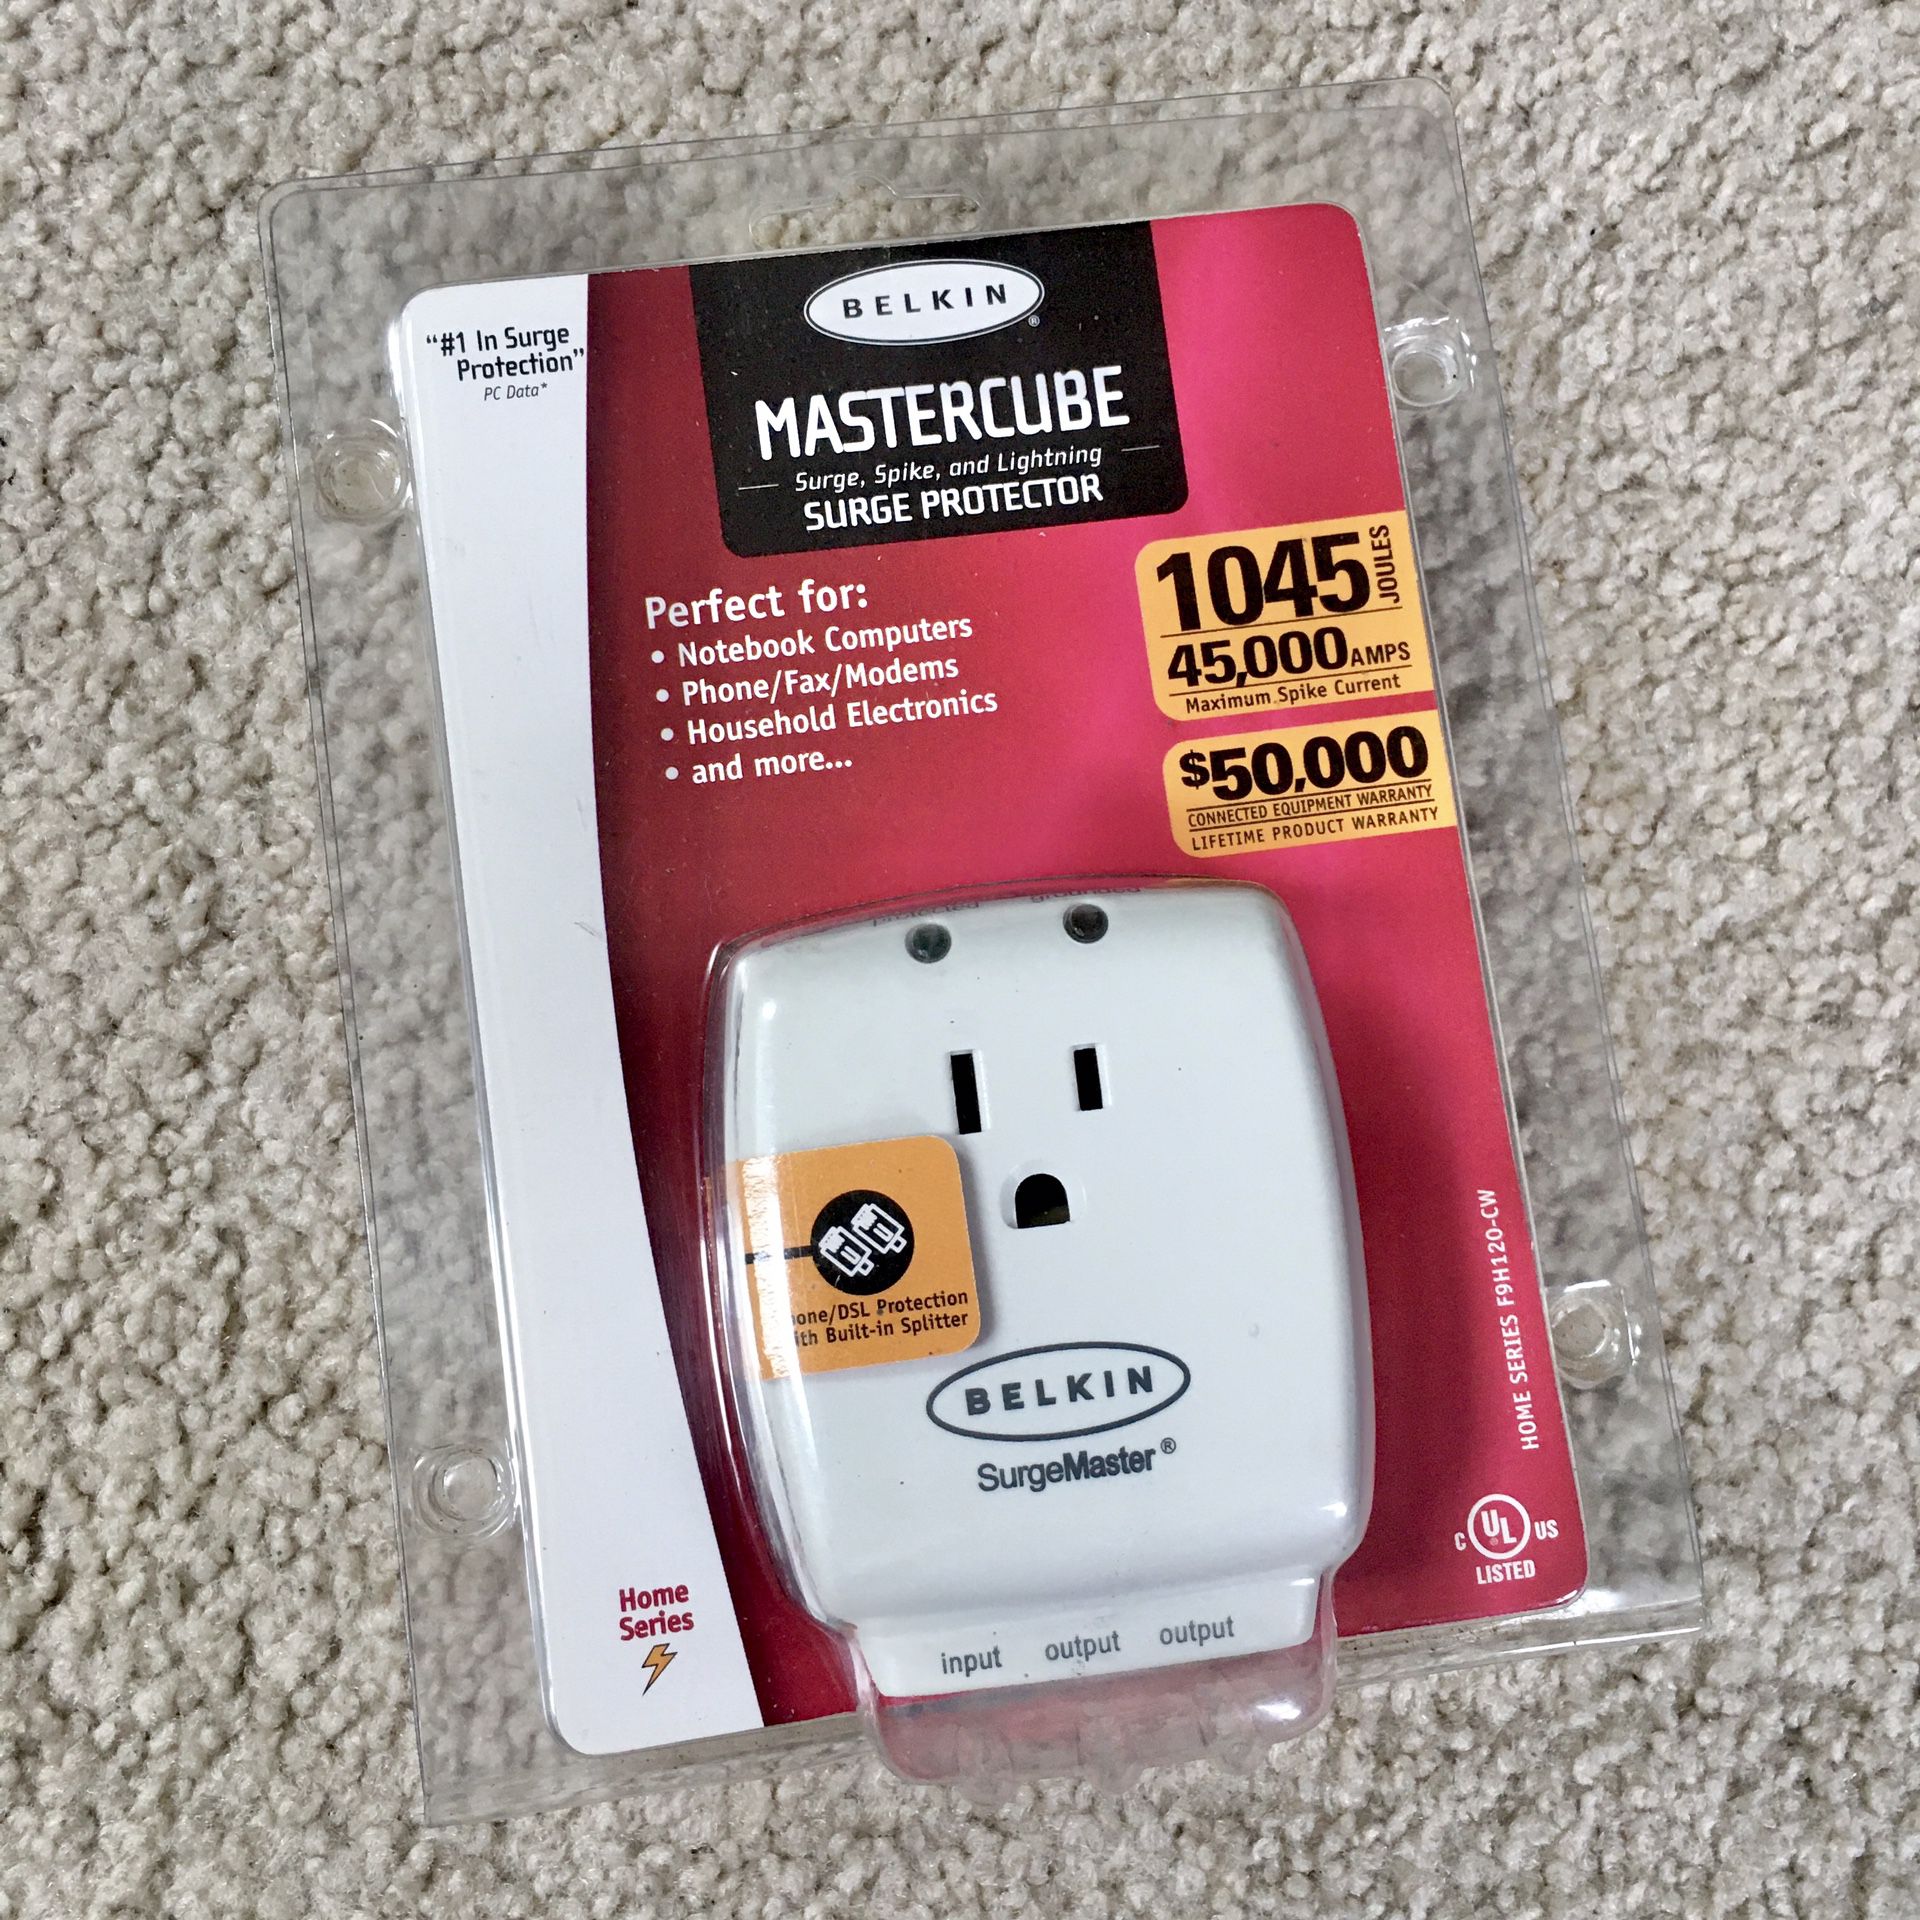 Belkin MasterCube Surge Protector Home Series F9H120-CW - NEW AND SEALED!!